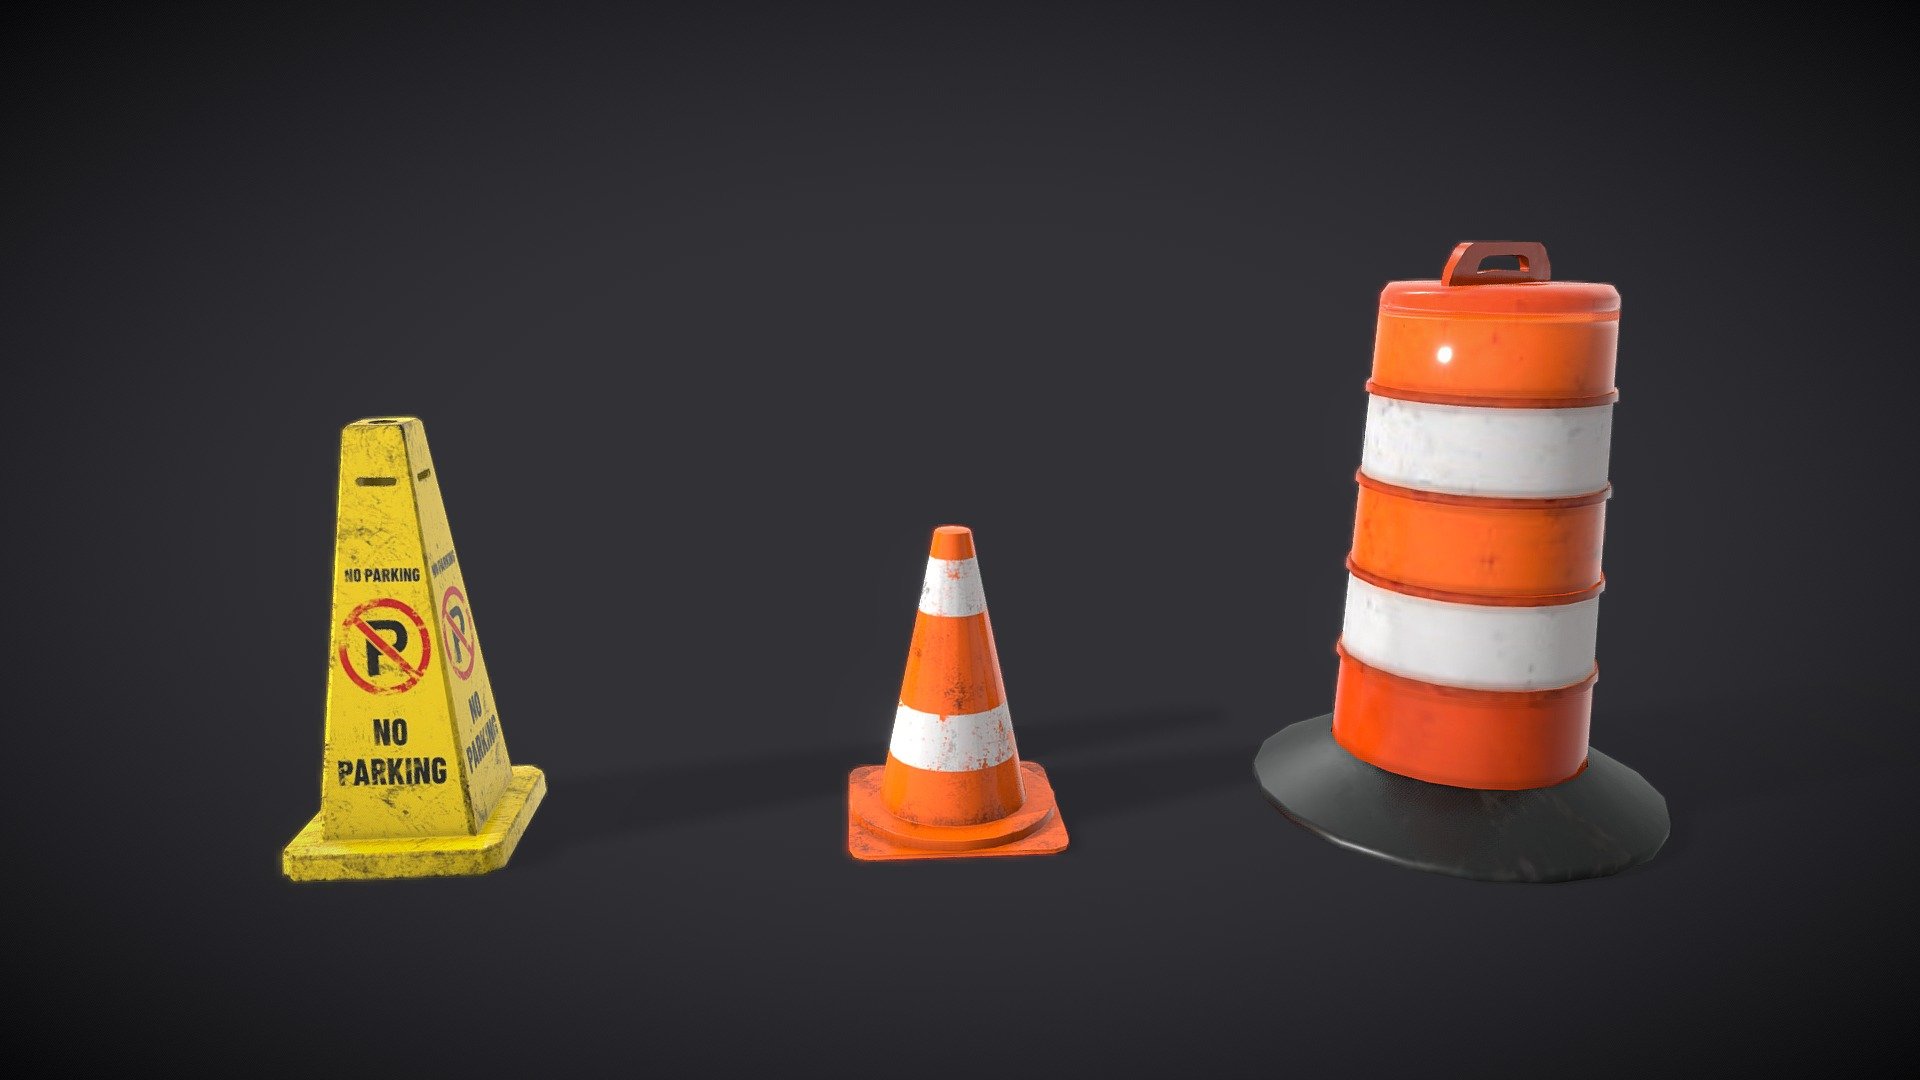 Construction Signs Pack



Dimensions : 2.58m x 0.773m x 1.08m

Texture : PBR, 1024

Files Include : Textures, GLB

Usage : VR, Game ready

.............

OVA’s flagship software, StellarX, allows those with no programming or coding knowledge to place 3D goods and create immersive experiences through simple drag-and-drop actions. 

Storytelling, which involves a series of interactions, sequences, and triggers are easily created through OVA’s patent-pending visual scripting tool. 

.............

**Download StellarX on the Meta Quest Store: oculus.com/experiences/quest/8132958546745663
**

**Download StellarX on Steam: store.steampowered.com/app/1214640/StellarX
**

Have a bigger immersive project in mind? Get in touch with us! 



StellarX on LinkedIn: linkedin.com/showcase/stellarx-by-ova

Join the StellarX Discord server! 

........

StellarX© 2024 - Construction Signs Pack - Buy Royalty Free 3D model by StellarX 3d model